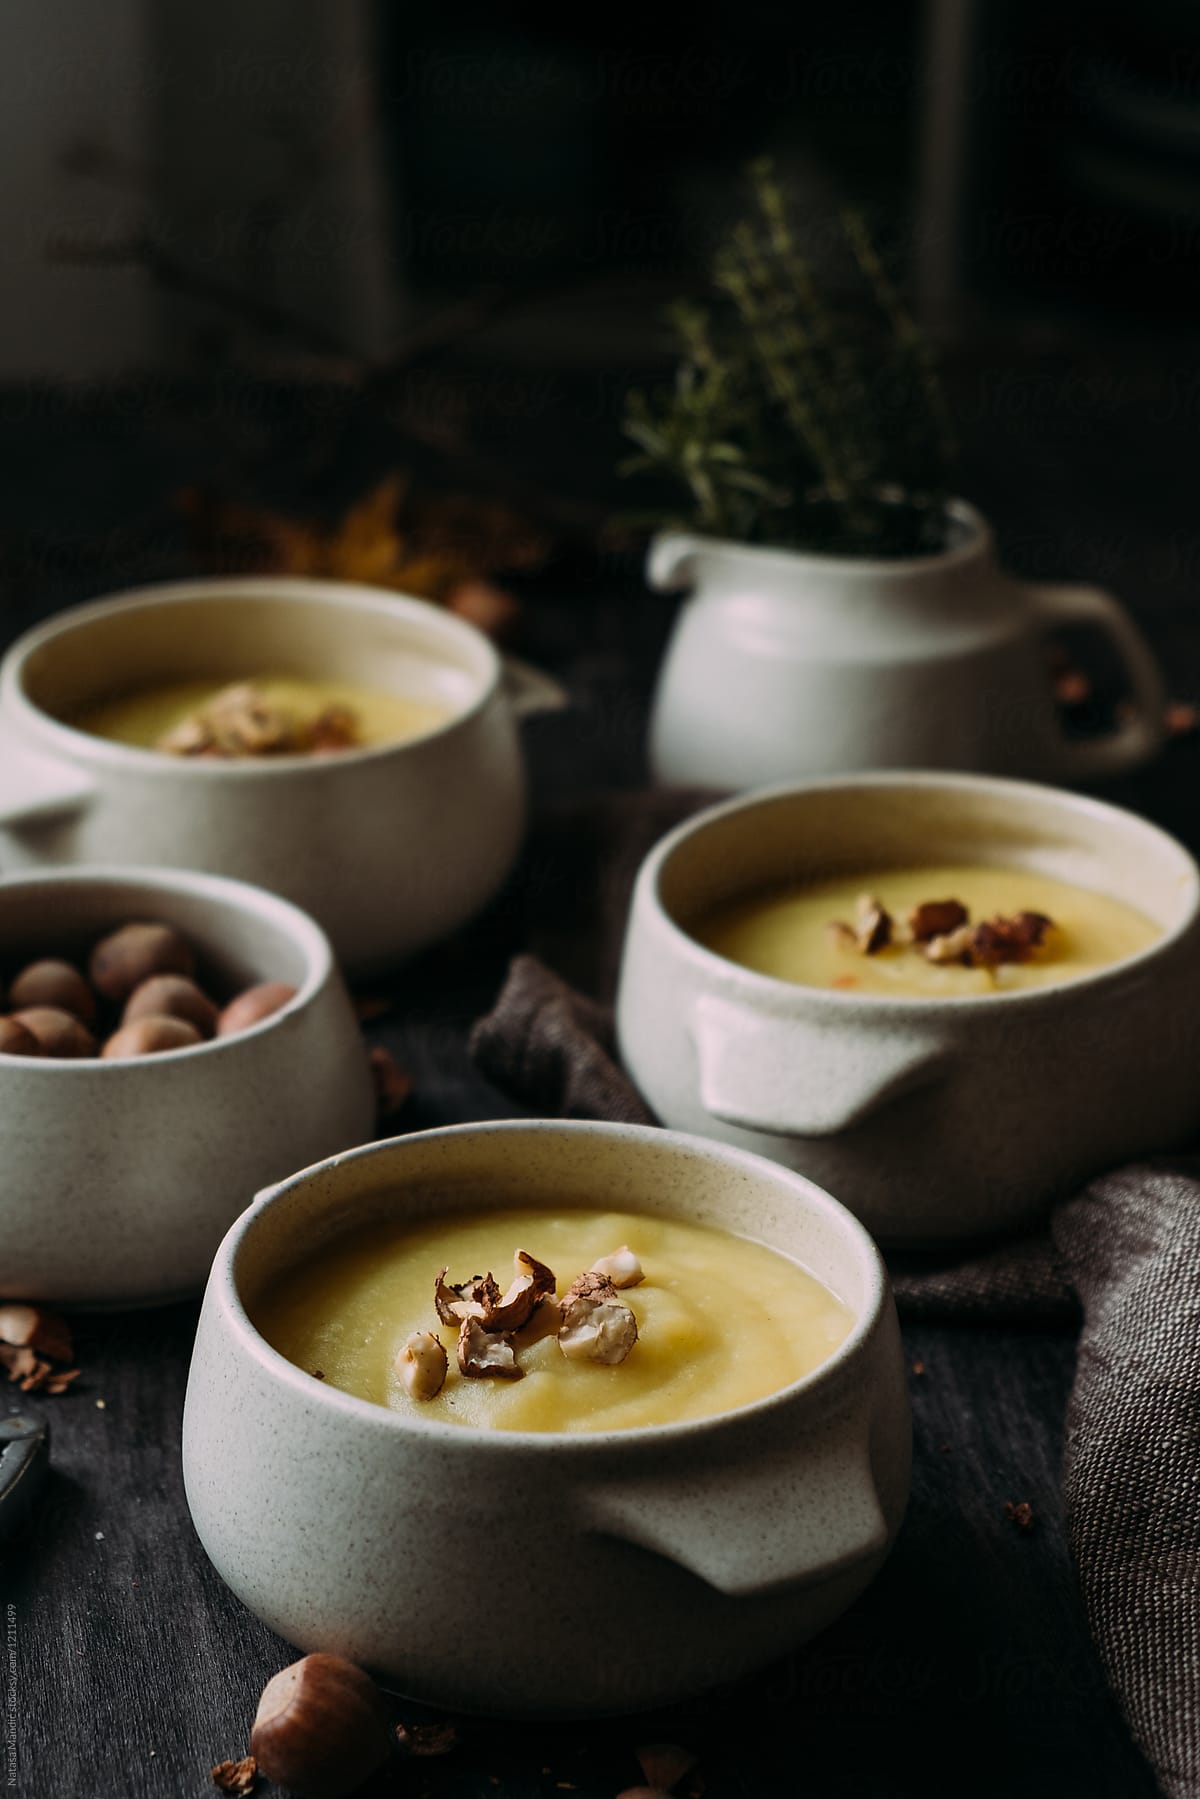 Homemade delicious creamy soup topped with hazelnuts